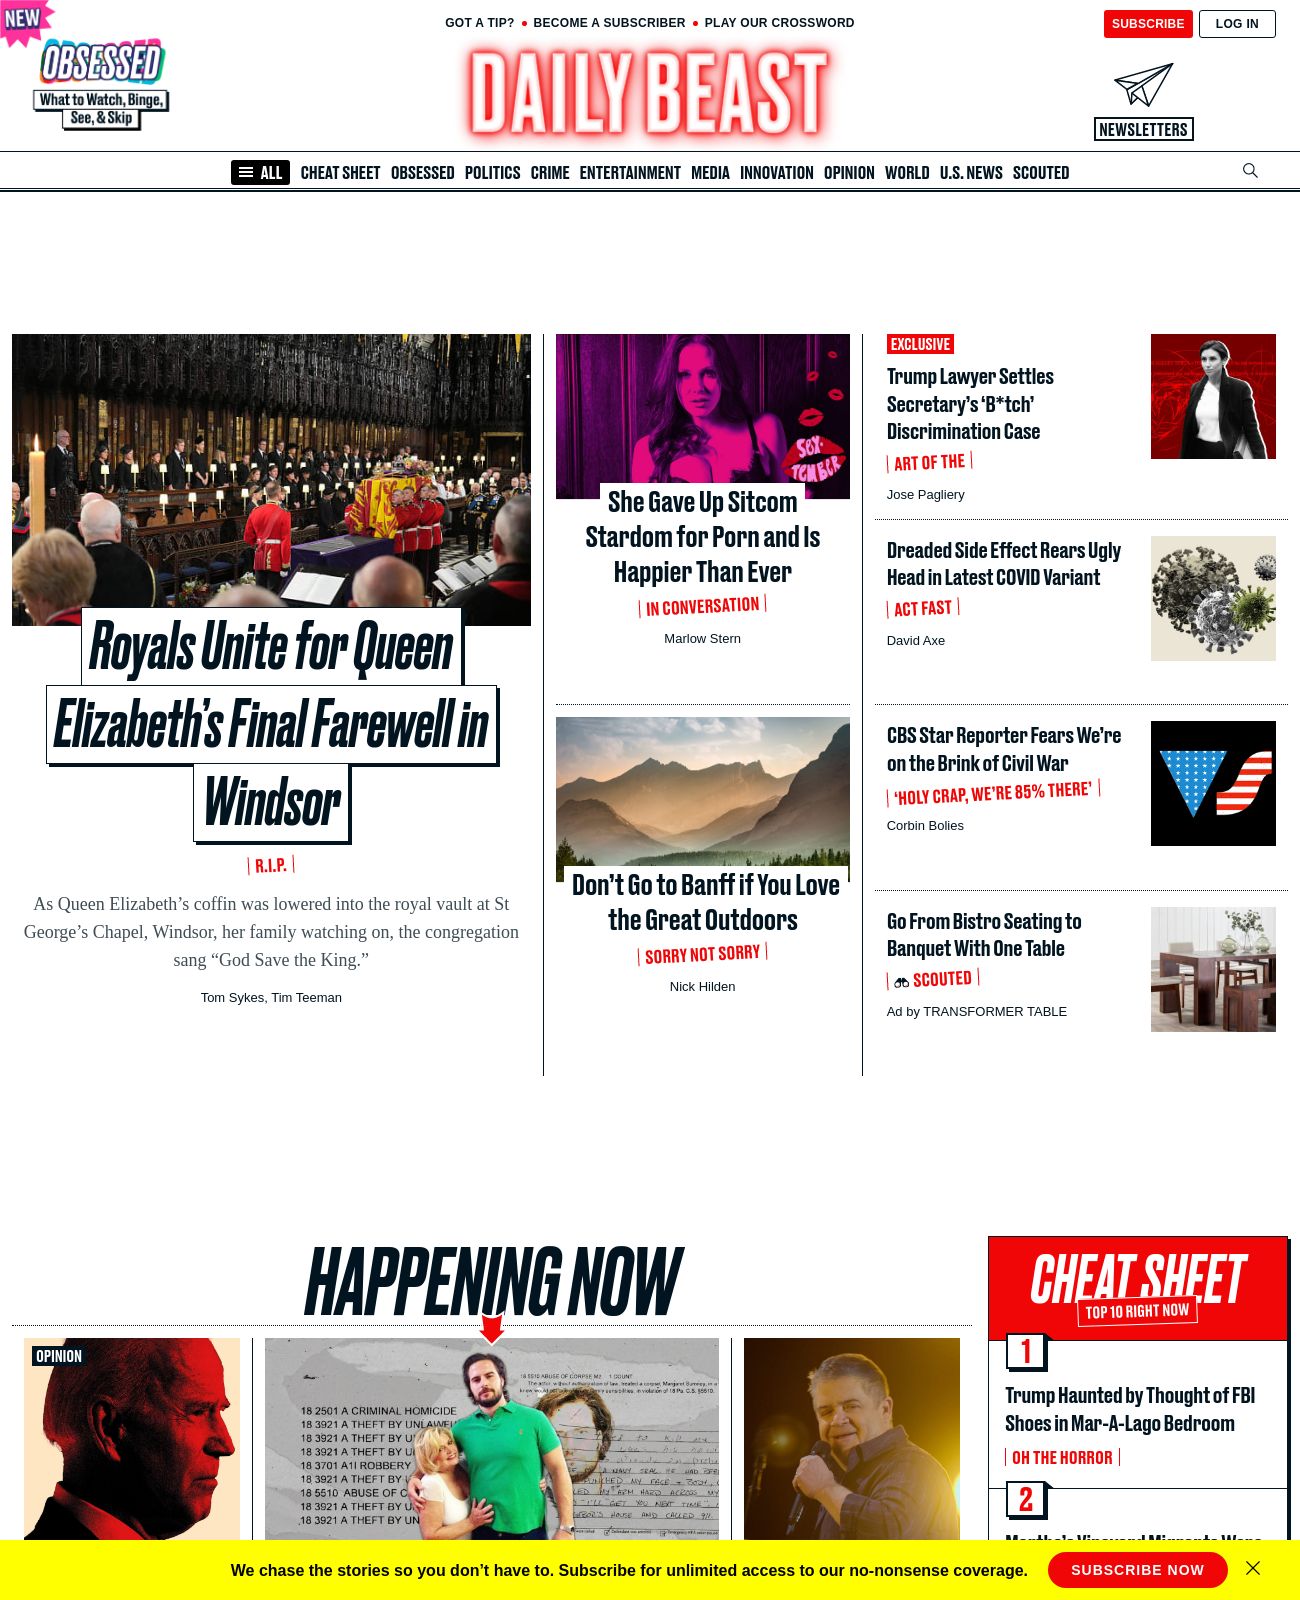 Daily Beast at 2022-09-19 13:27:08-04:00 local time